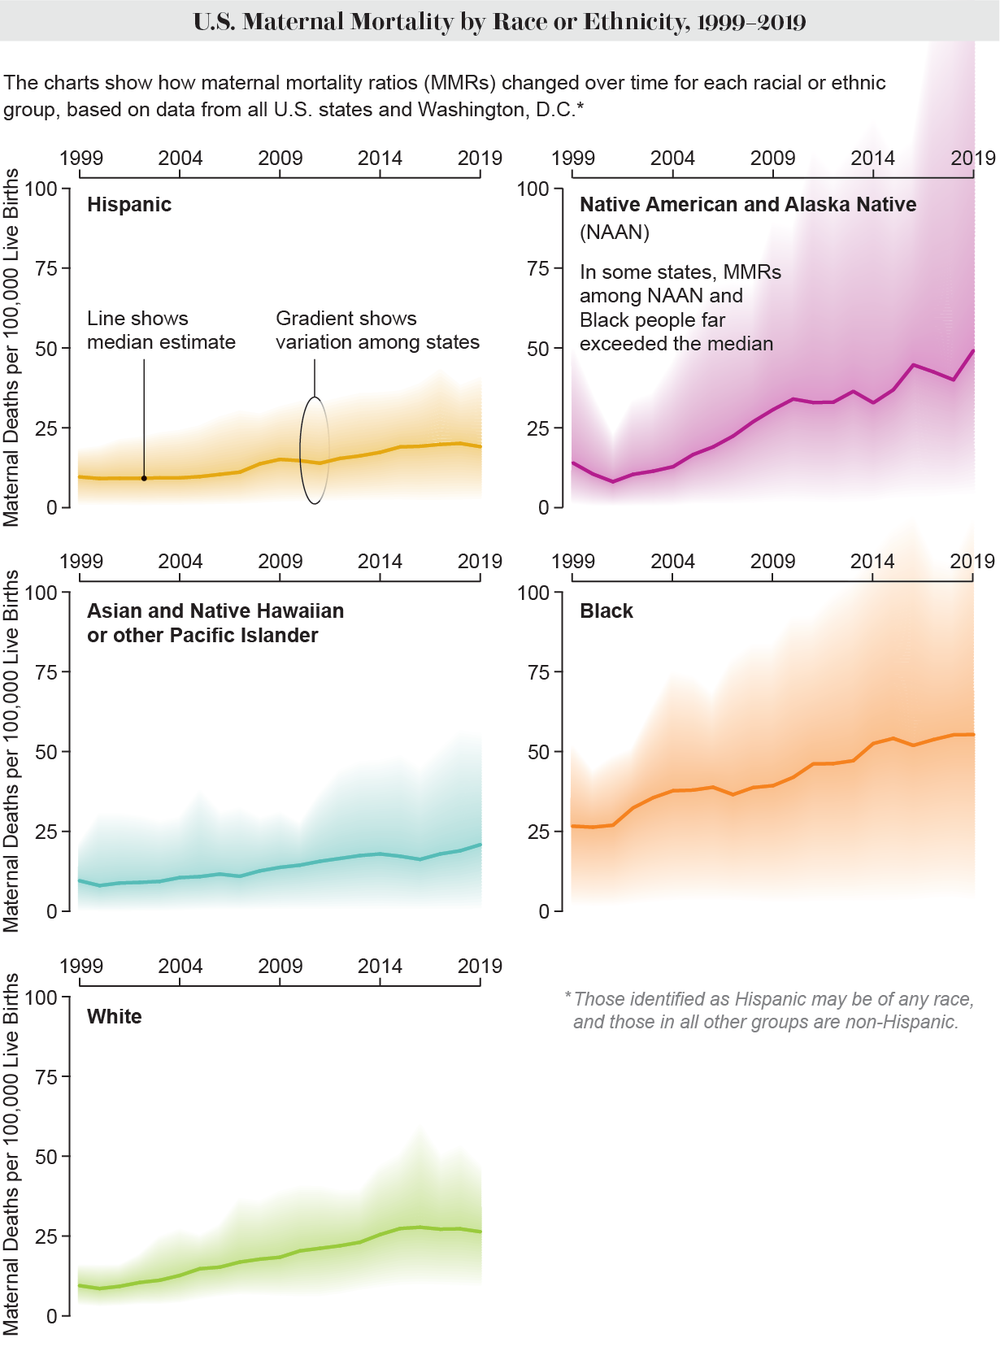 Line charts show U.S. maternal mortality ratios among five categories of racial or ethnic groups from 1999 to 2019.